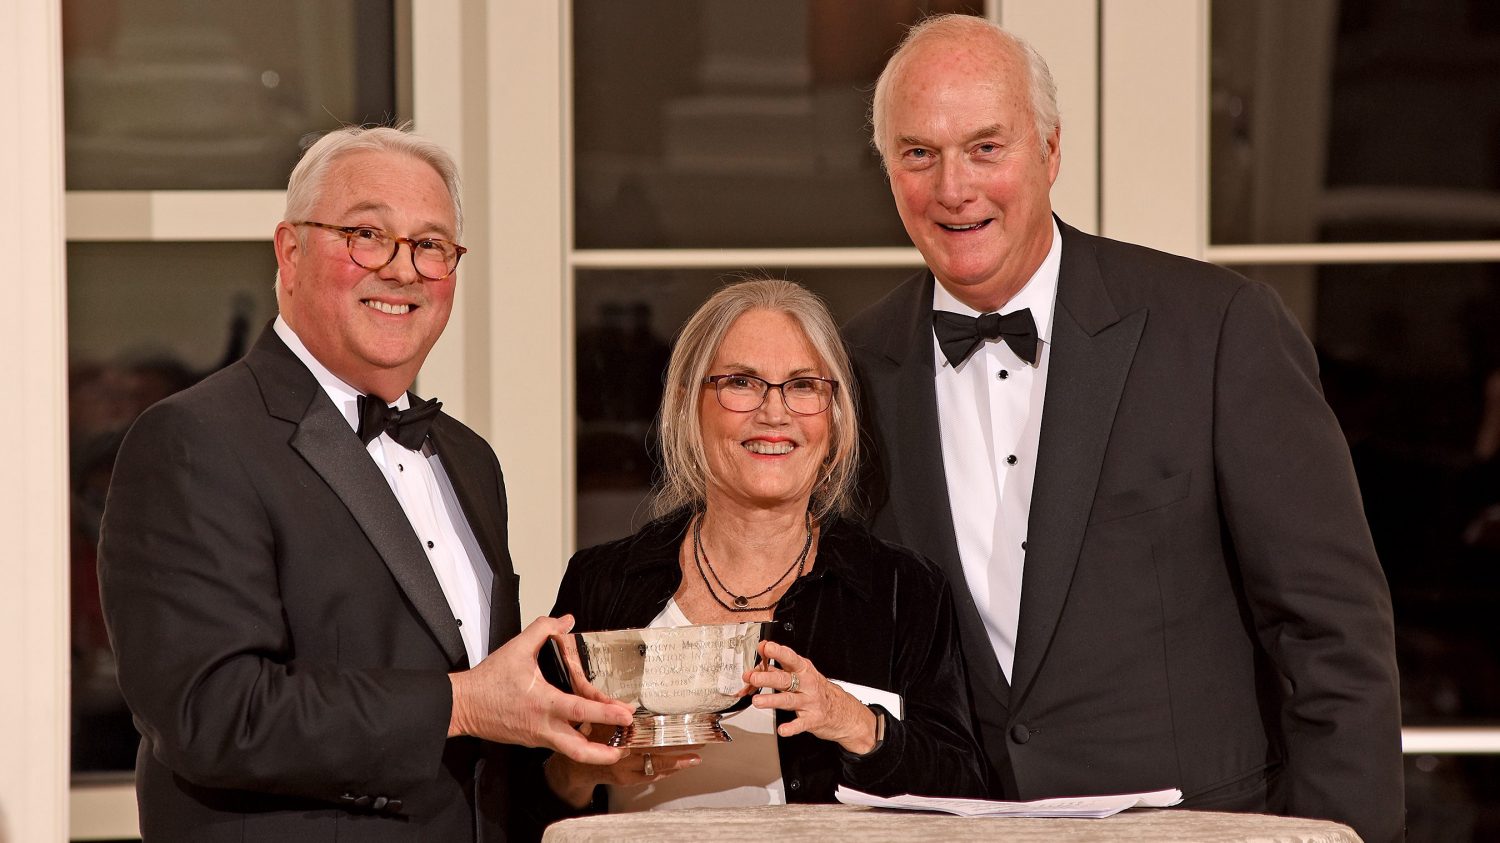 Chancellor Woodson, Adelaide Gomer and Charlie Stallings with the Menscer Cup